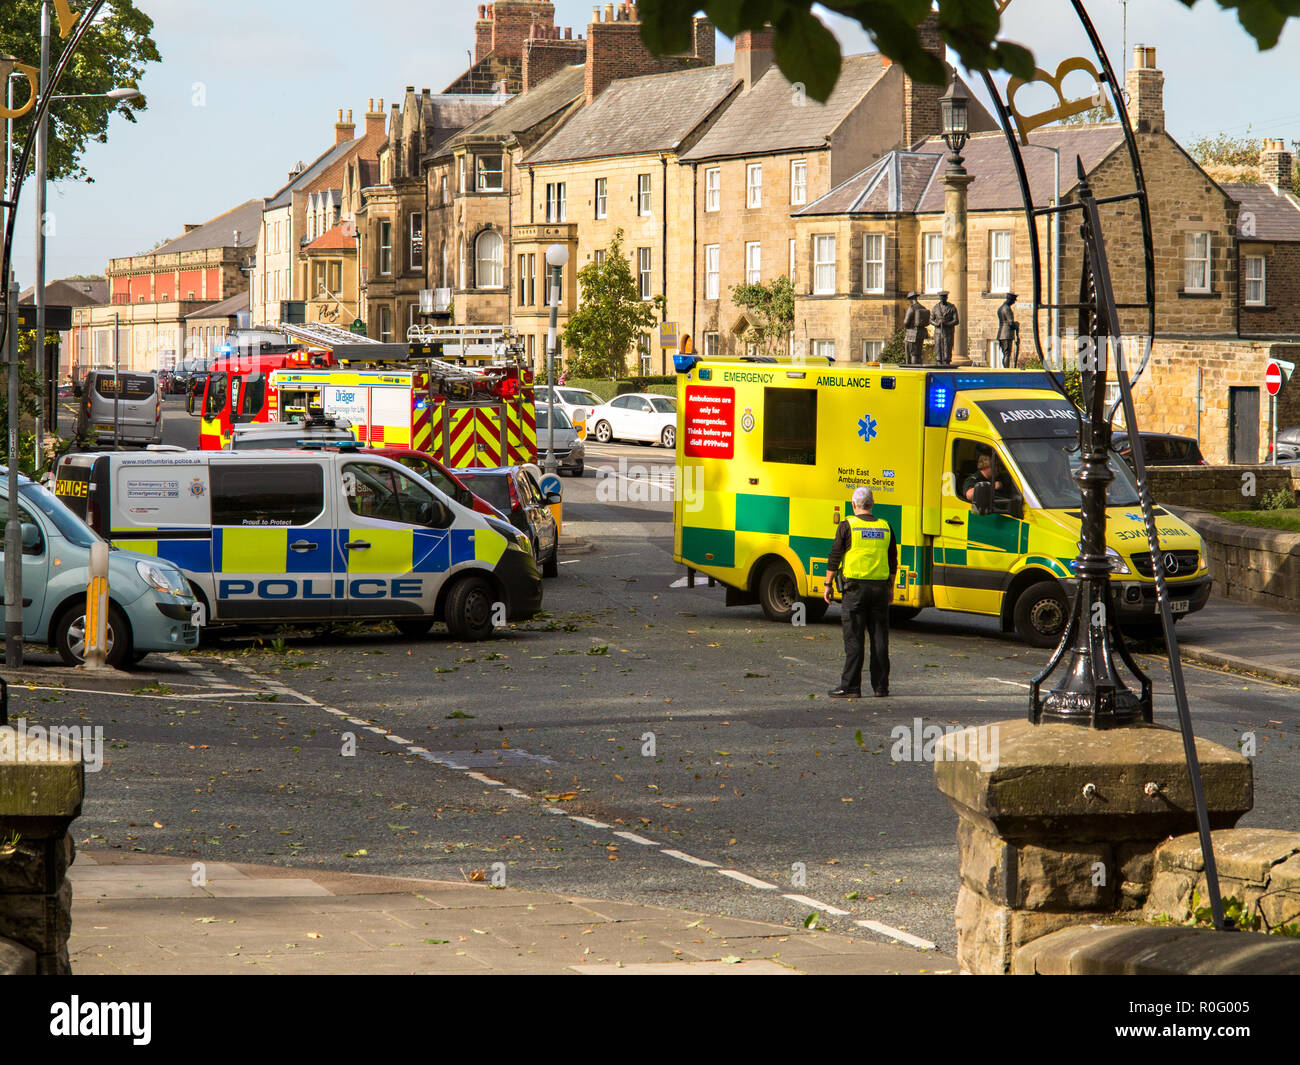 Emergency services fire police and ambulance paramedics attend a road traffic accident  at Alnwick Northumberland England UK Stock Photo